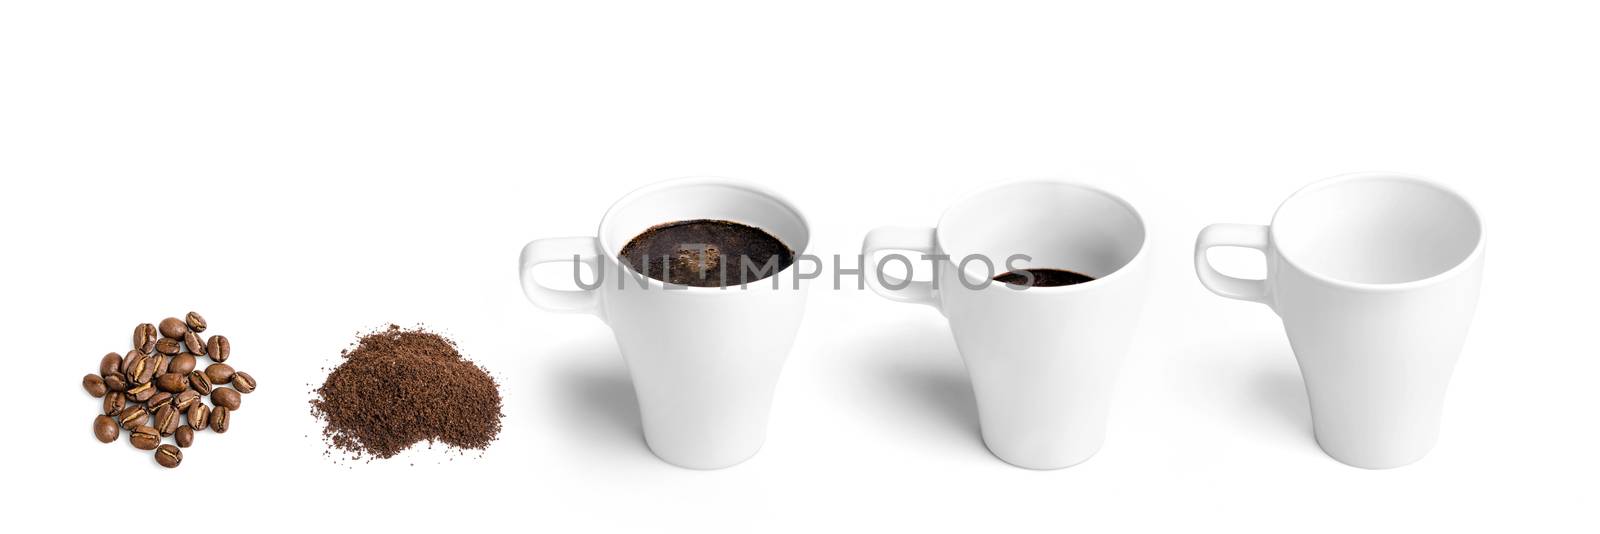 Concept of making and drinking coffee displayed in five steps isolated on white background.